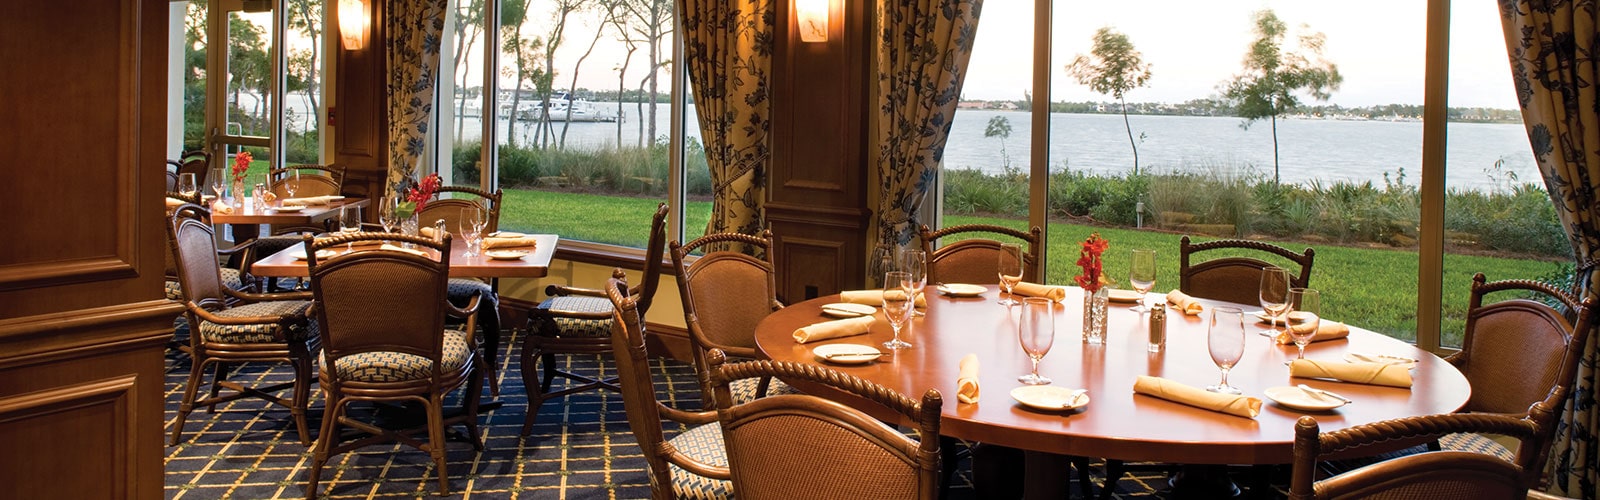 Harbour Ridge Yacht & Country Club Announces New Executive Chef, John O’Leary